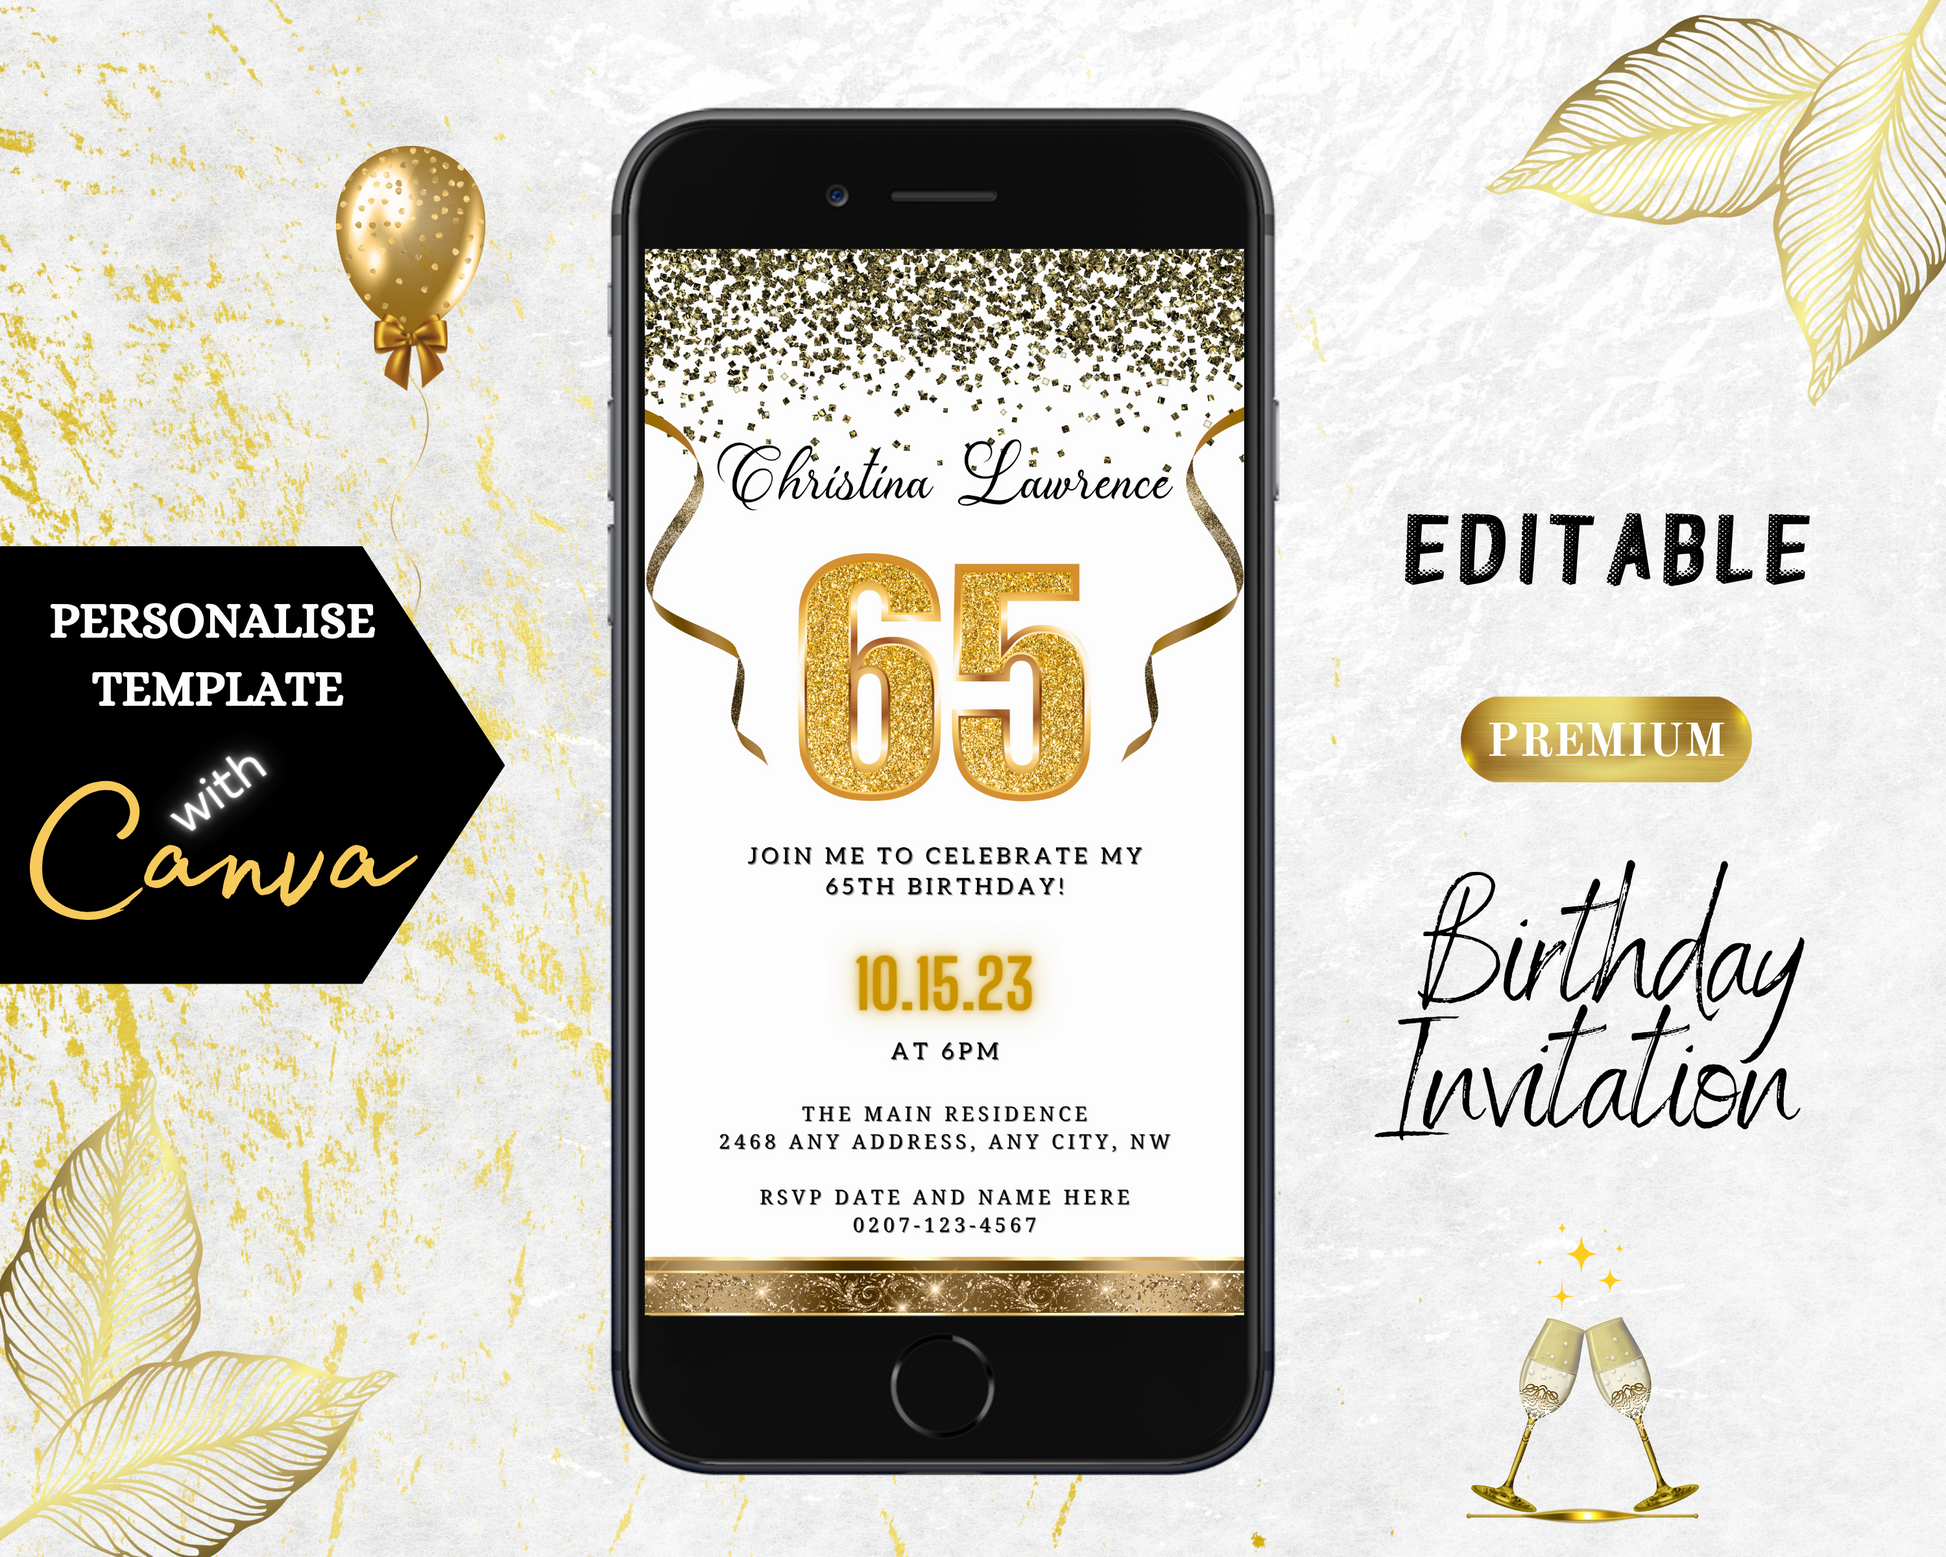 Customizable White Gold Confetti 65th Birthday Evite displayed on a smartphone screen, showcasing editable text and design elements for digital invitations.